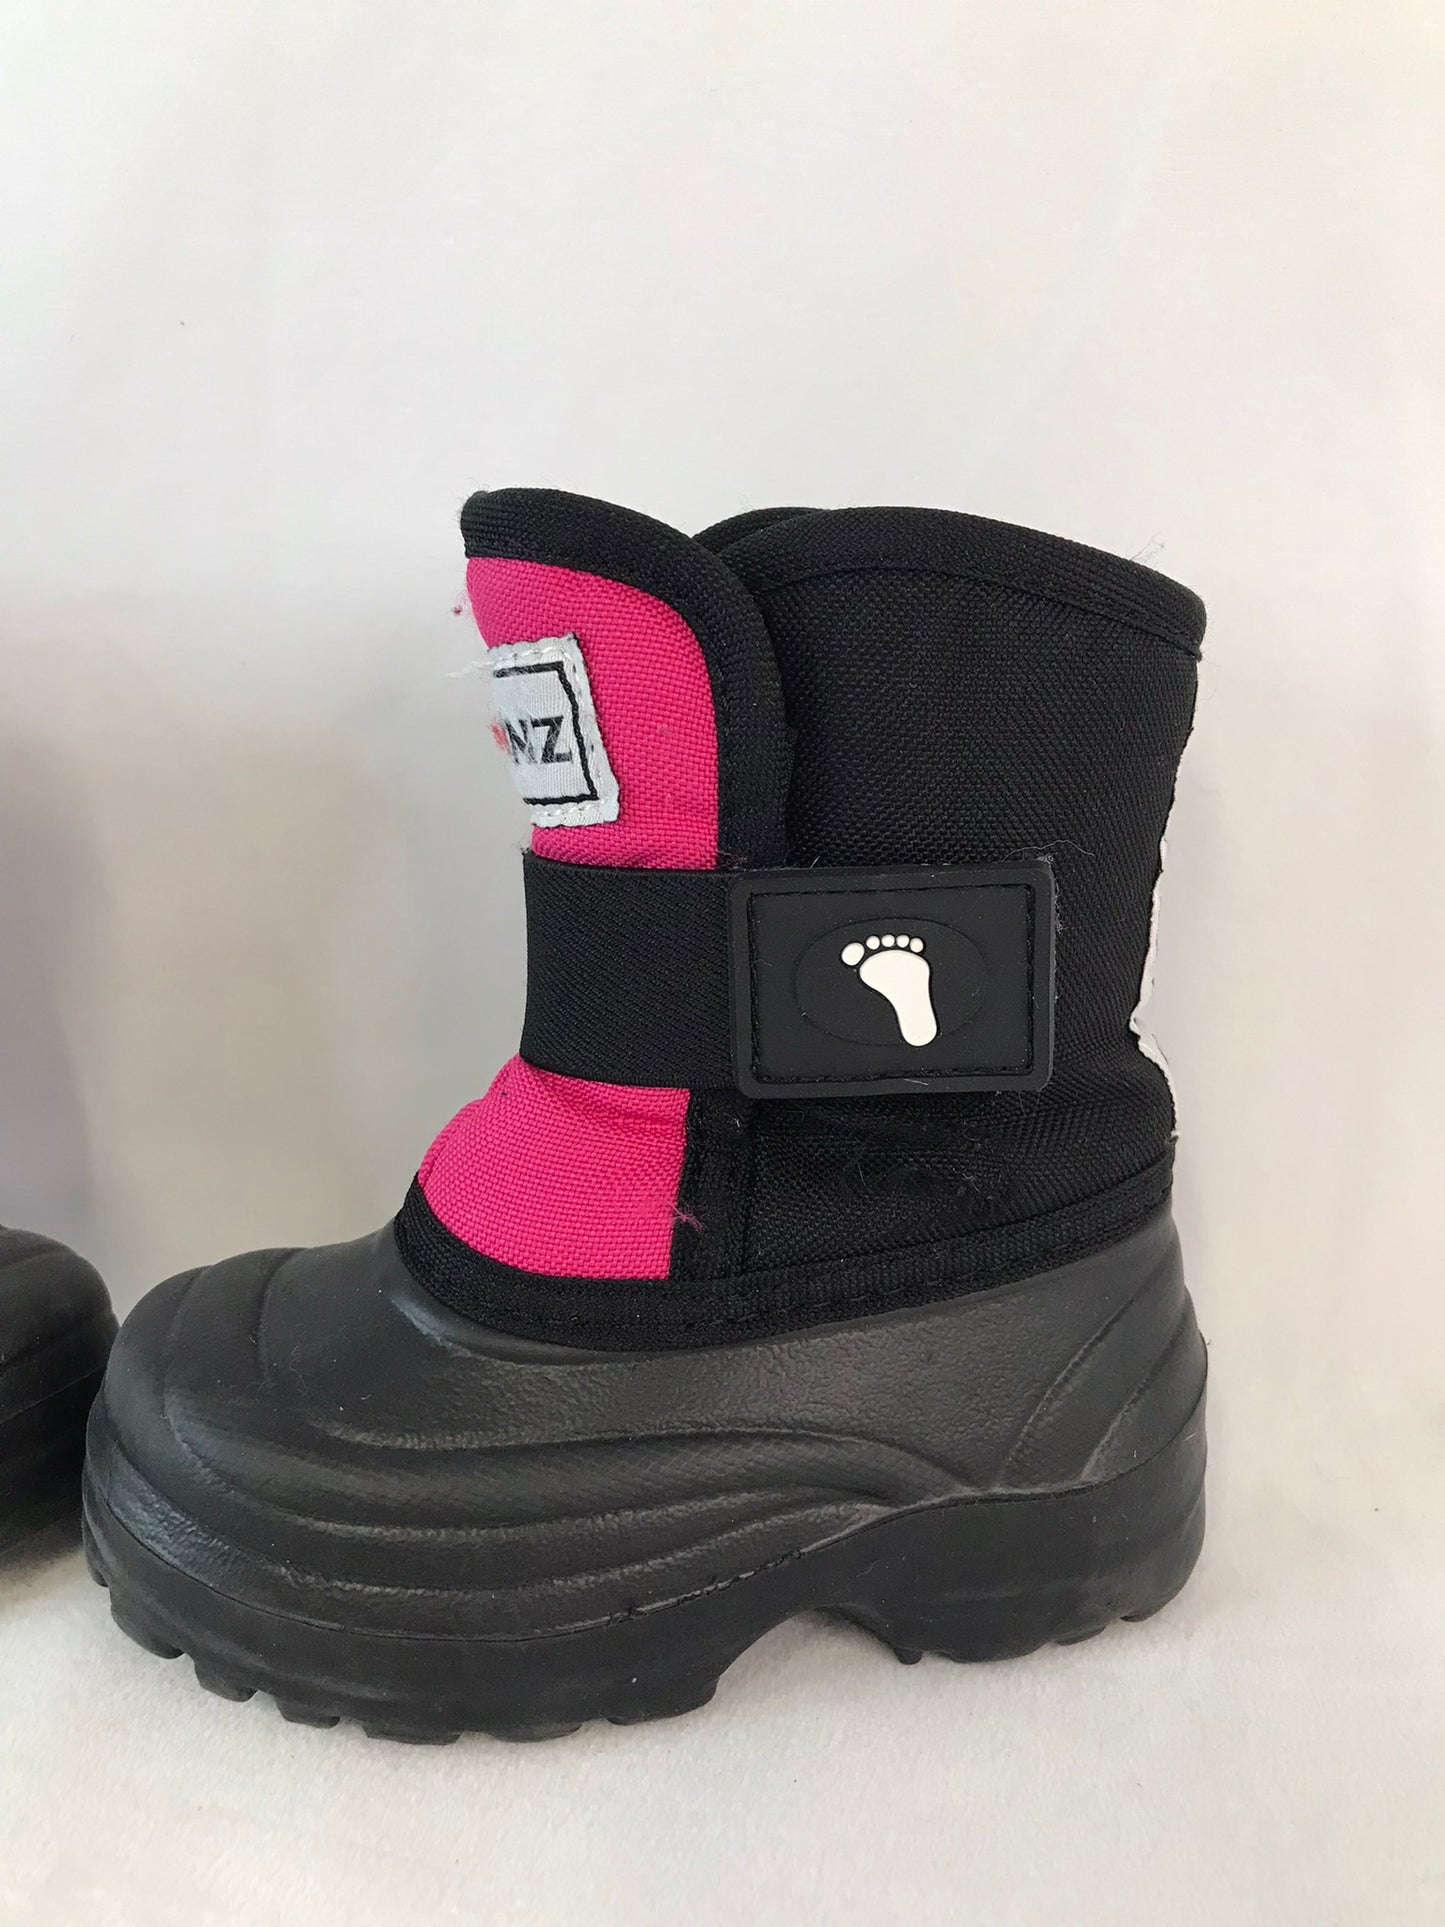 Rain boots Child Size 5 Infant Toddler Stonz Black Pink Outstanding Quality